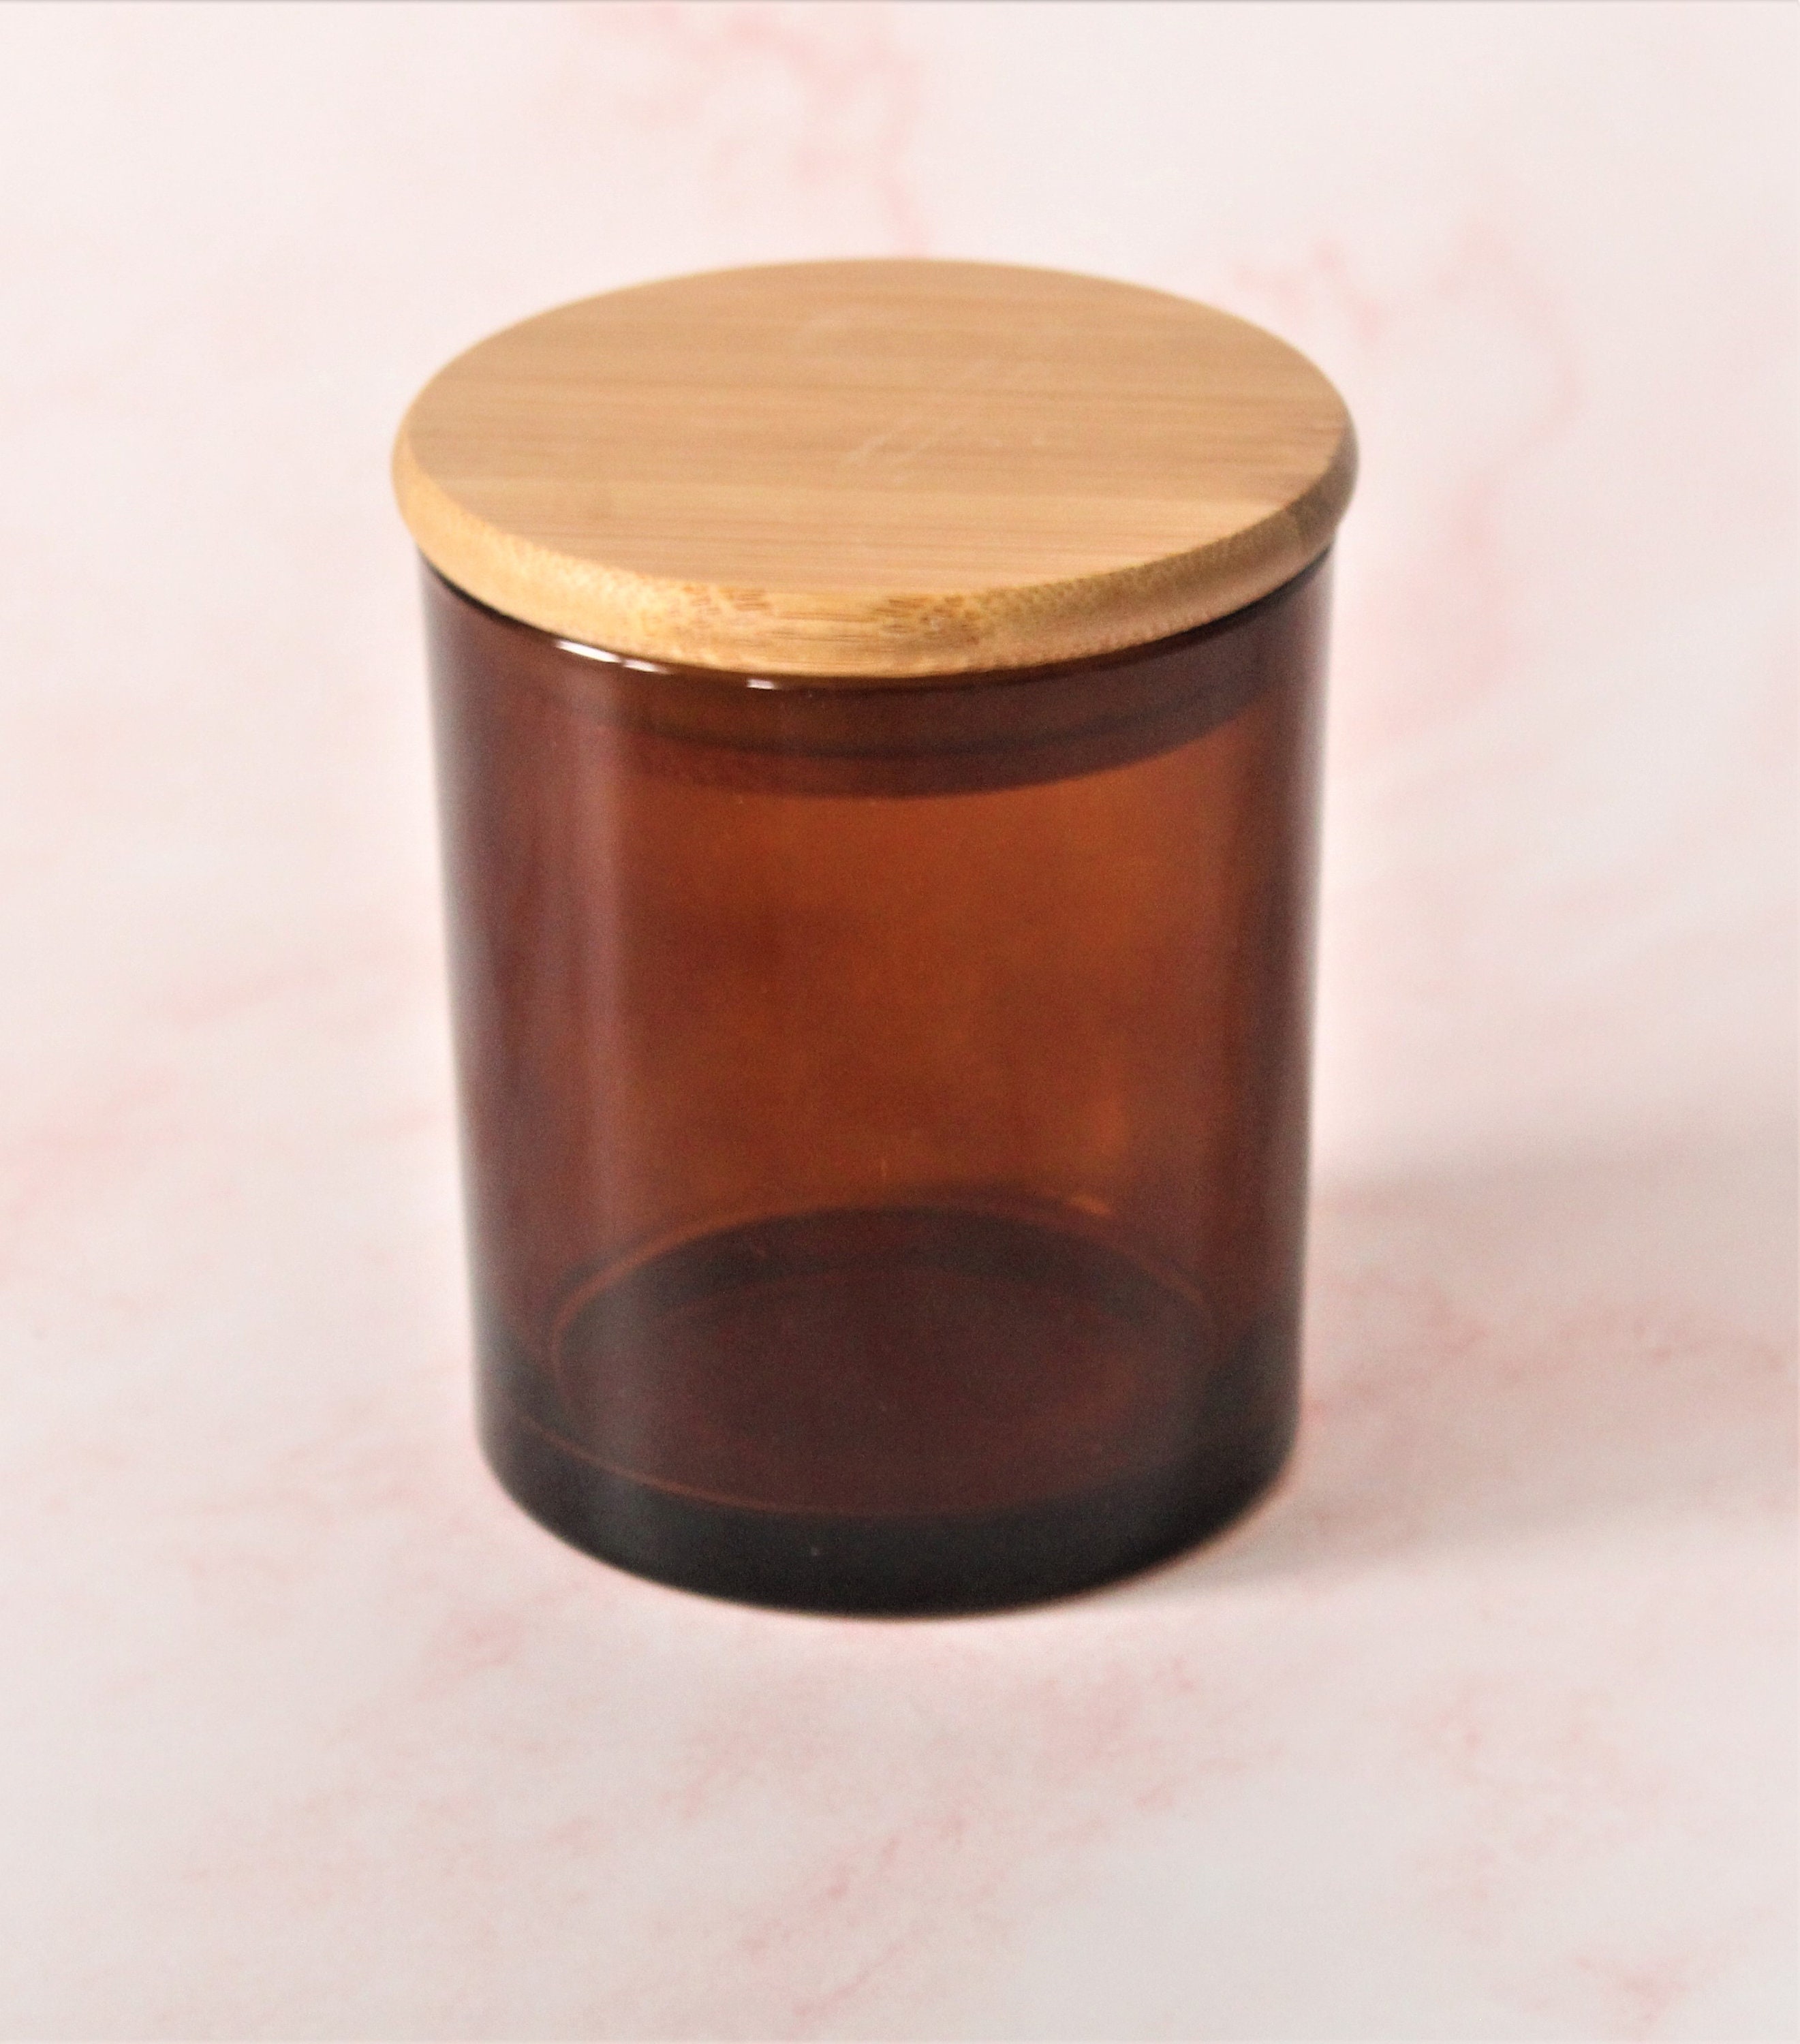 10 Oz. Empty Candle Jar With Bamboo Lid Candle Container Candle